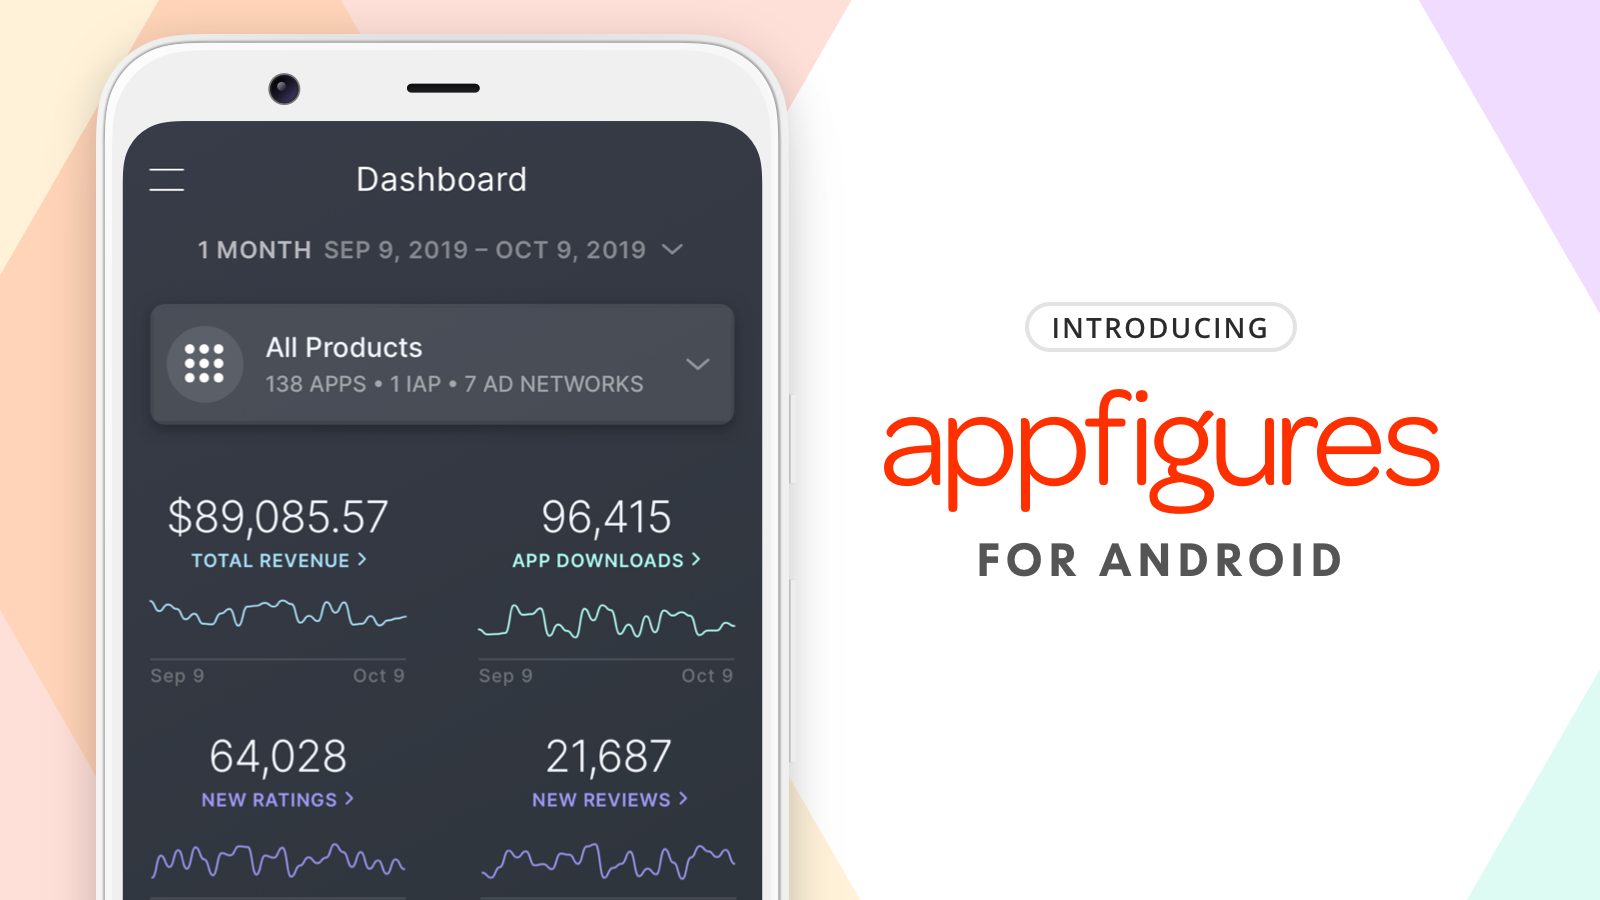 Appfigures is now available for Android on Google Play